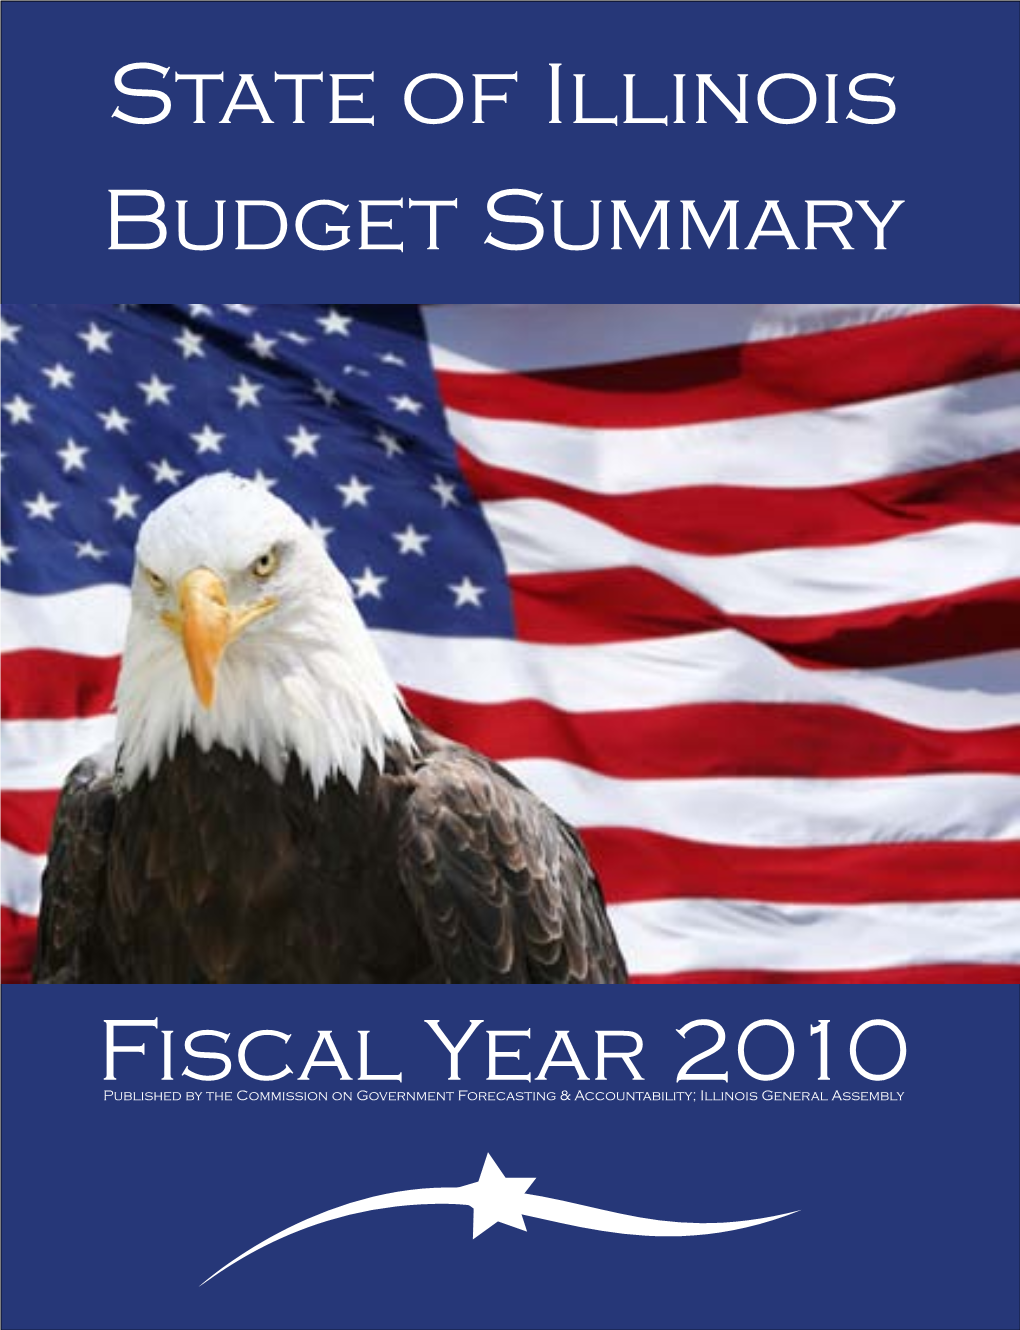 Fiscal Year 2010 Budget Summary State of Illinois